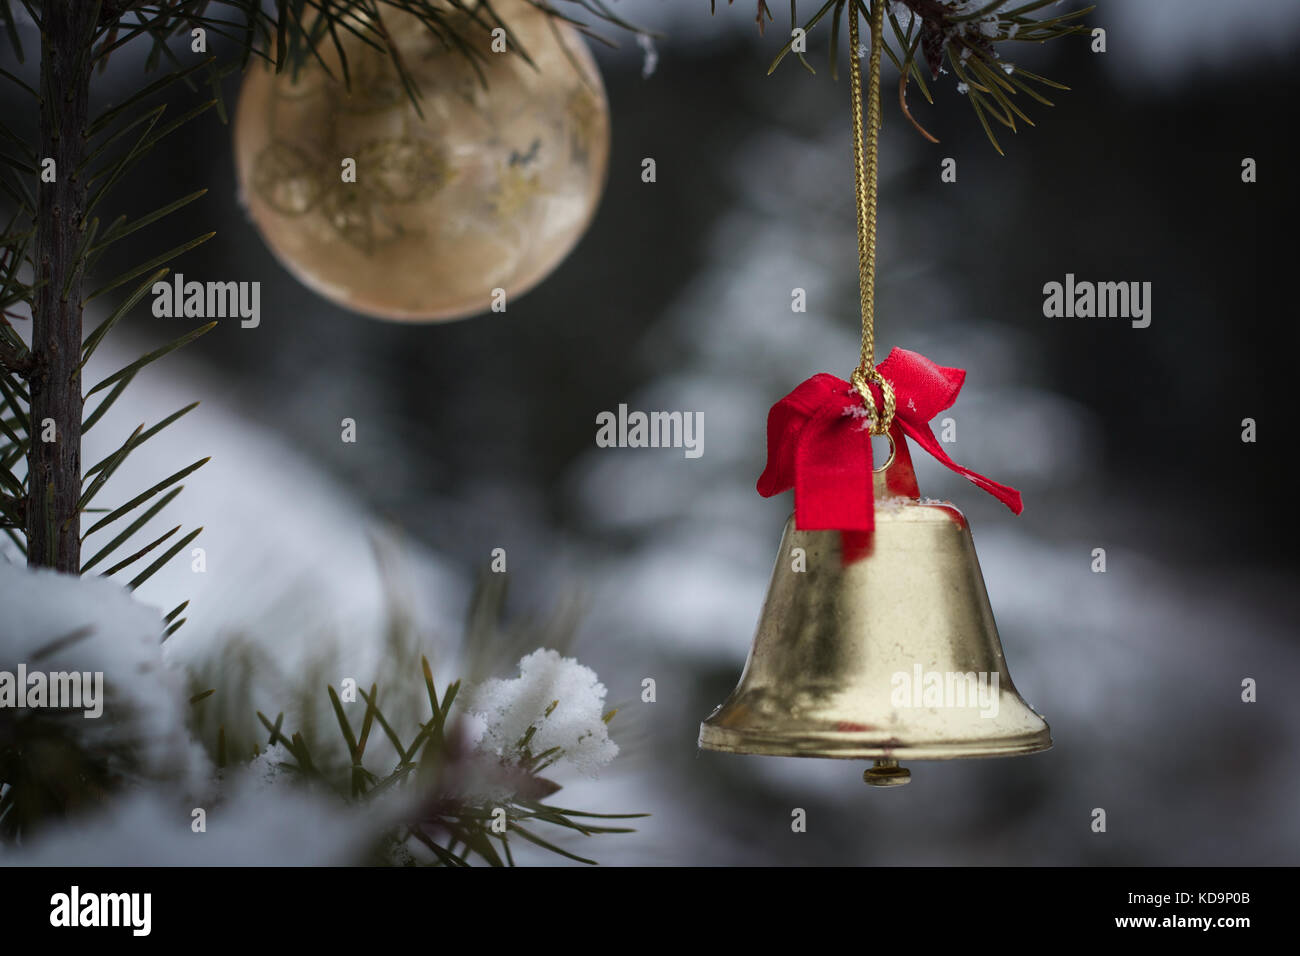 Christmas ornaments hanging on a tree in the snowy outdoors Stock Photo